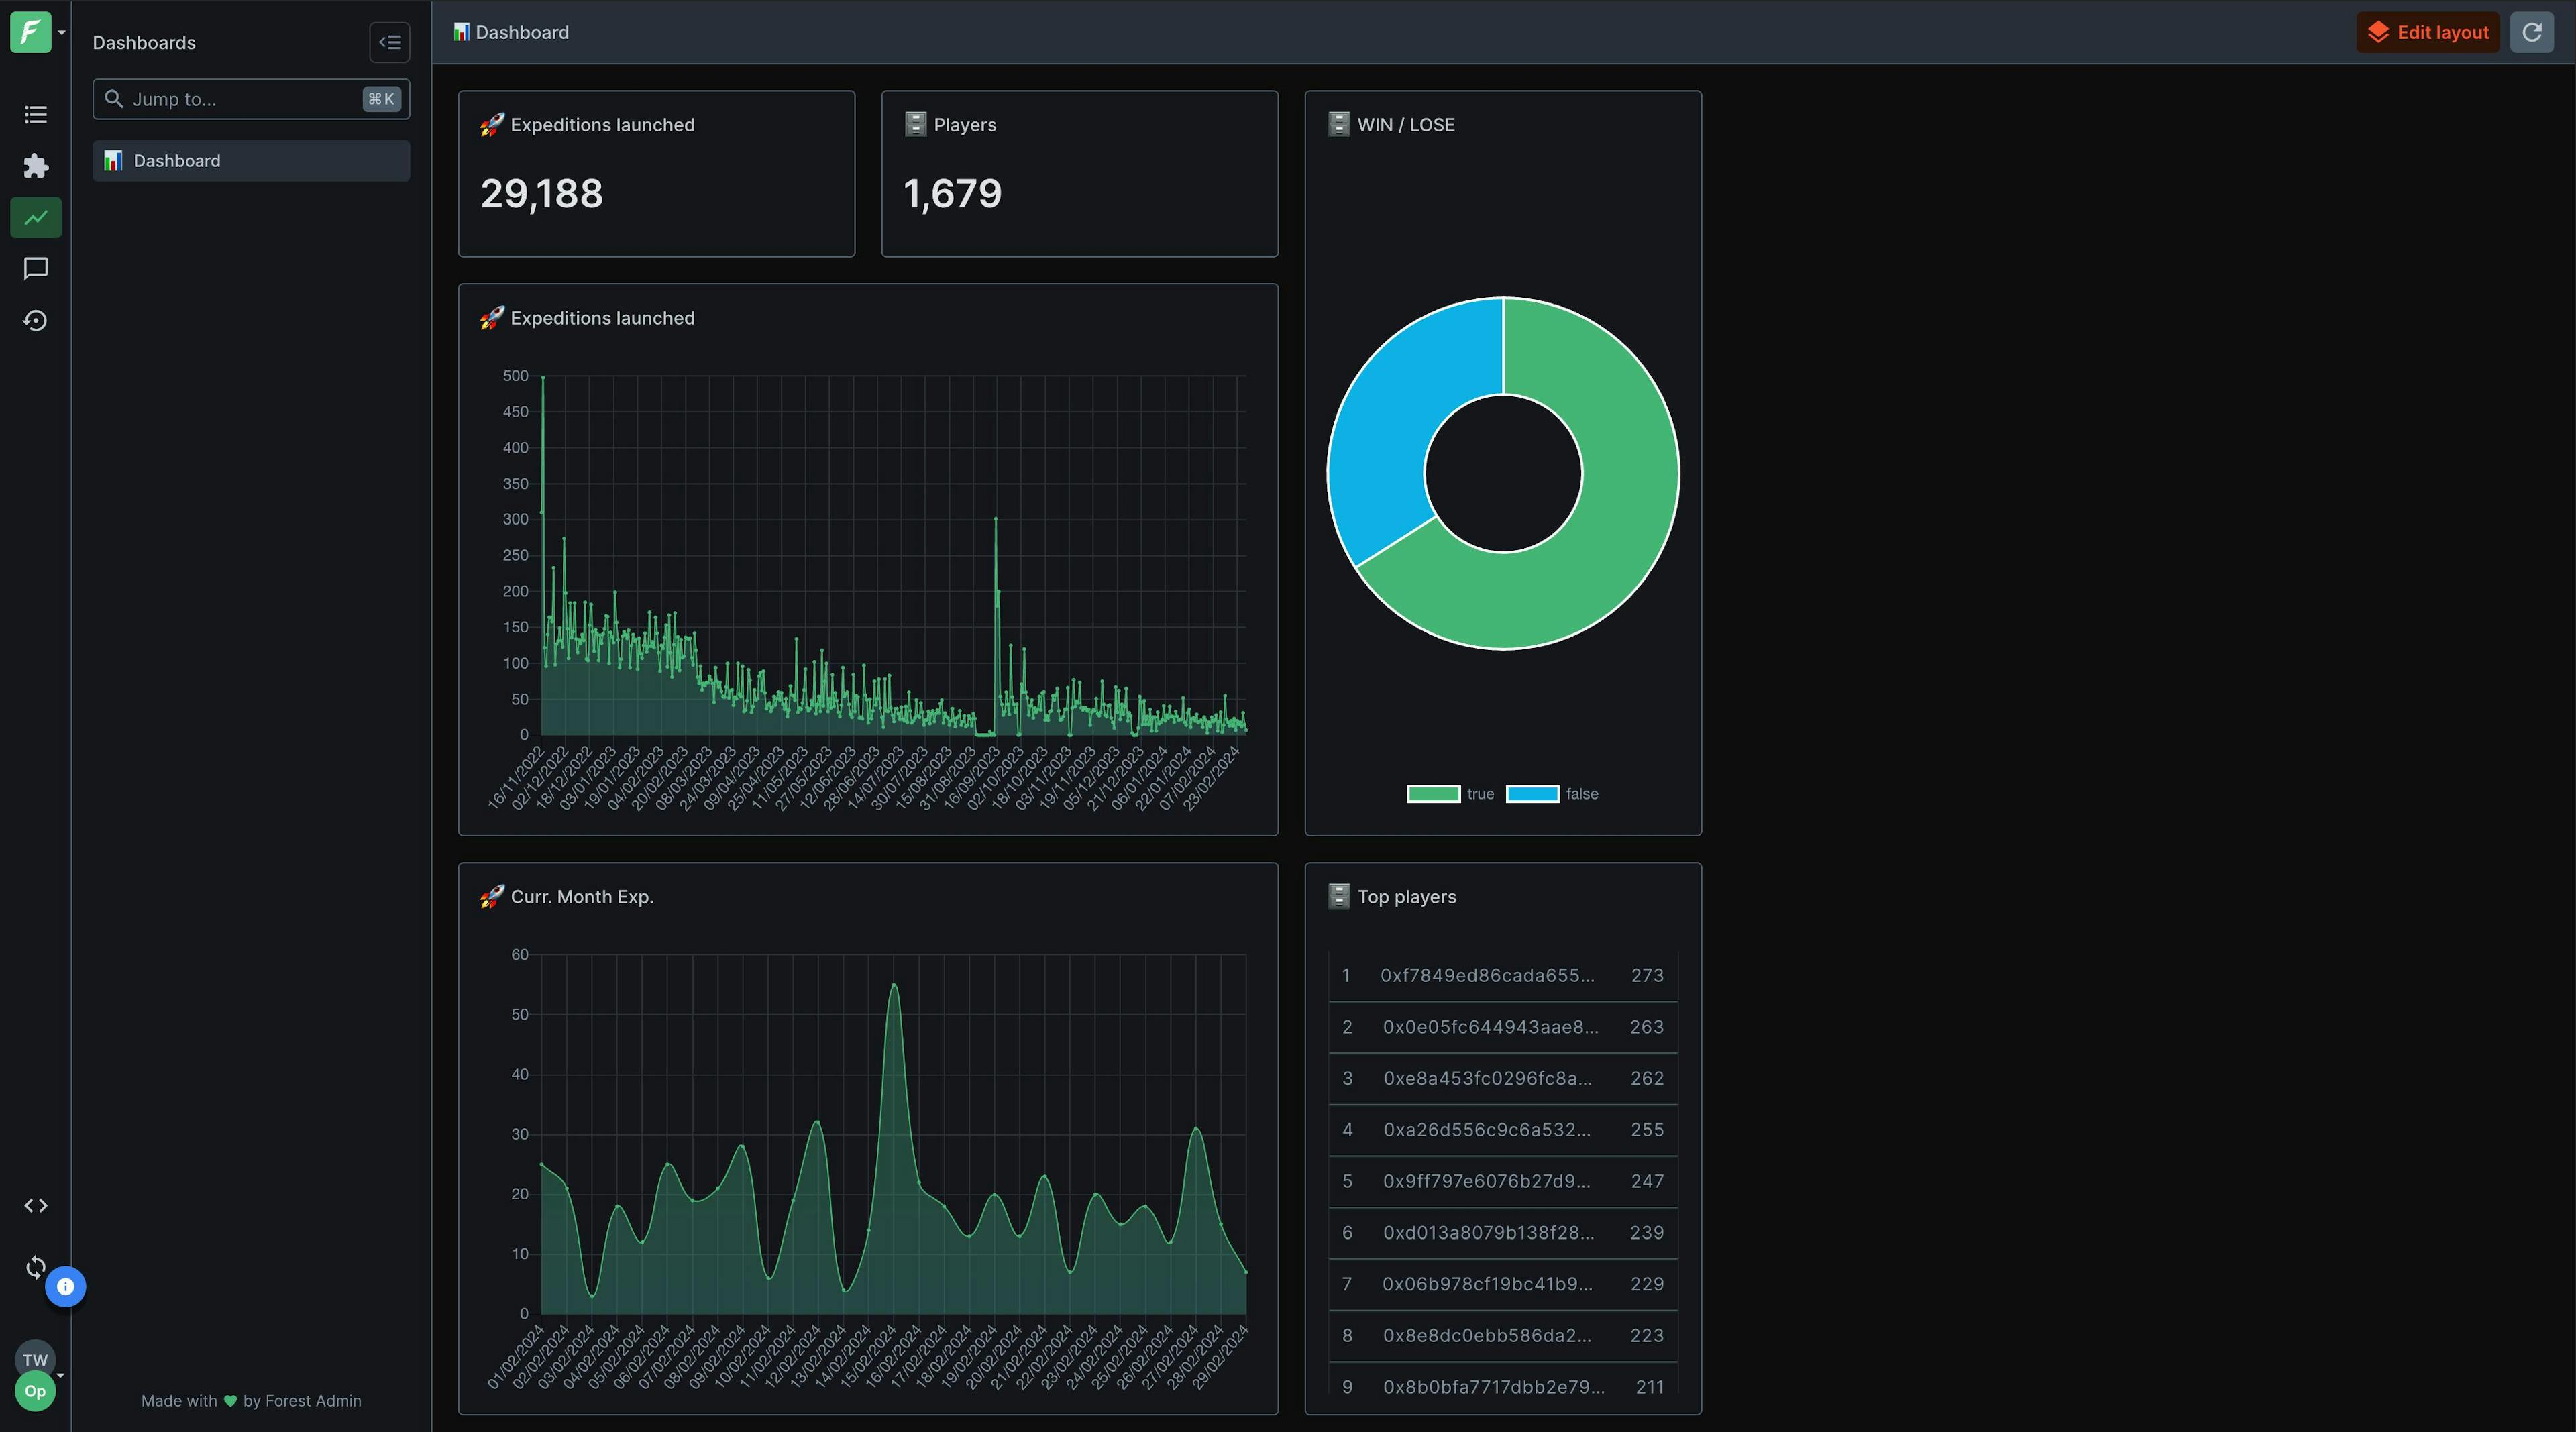 Preview of a dashboard on the Forest Admin interface